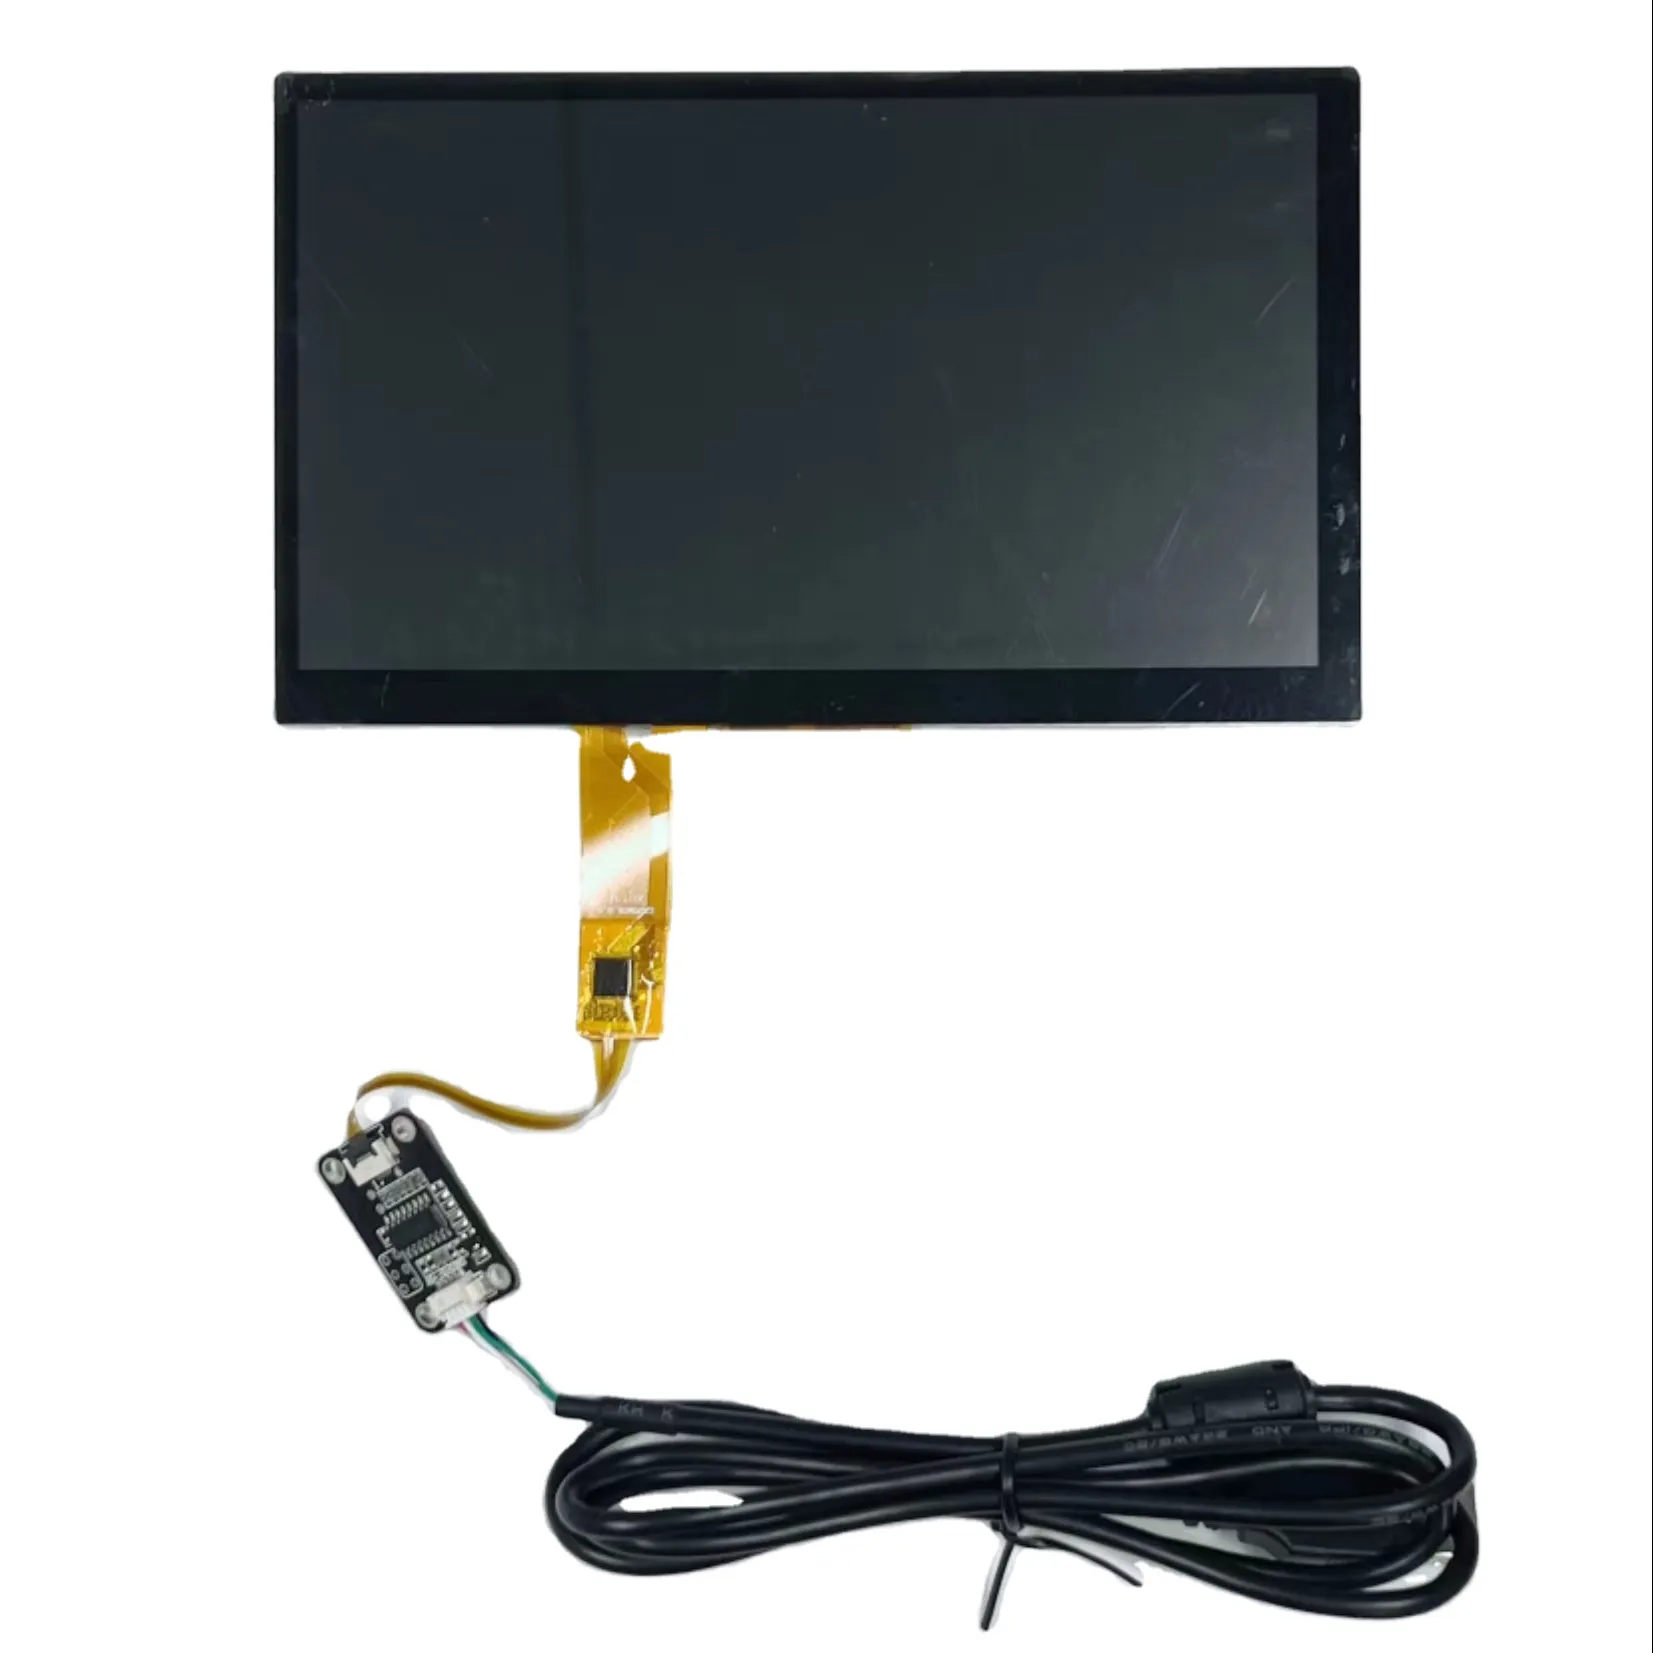 Display 7 Lcd Screen Display Specialist Manufacturers 7 Inch LVDS TFT Transmiss Full Active View With CTP